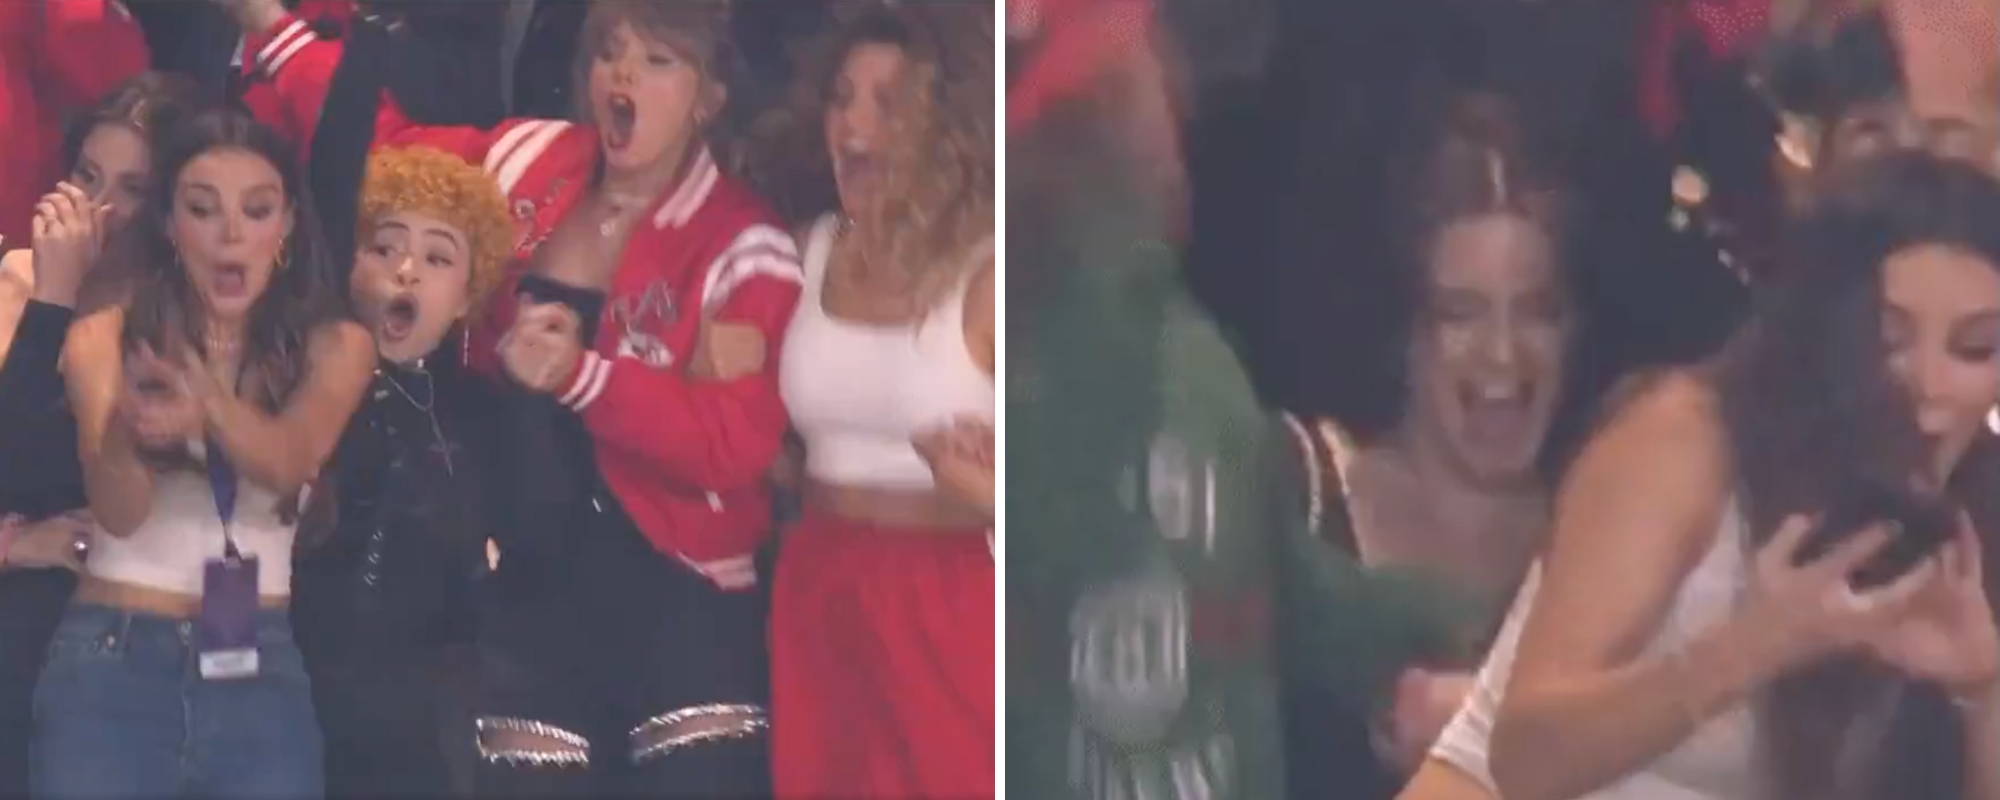 Lana Del Rey Hilariously Gets Caught in the Crossfire as Taylor Swift Goes Bonkers Over Chiefs Super Bowl Win